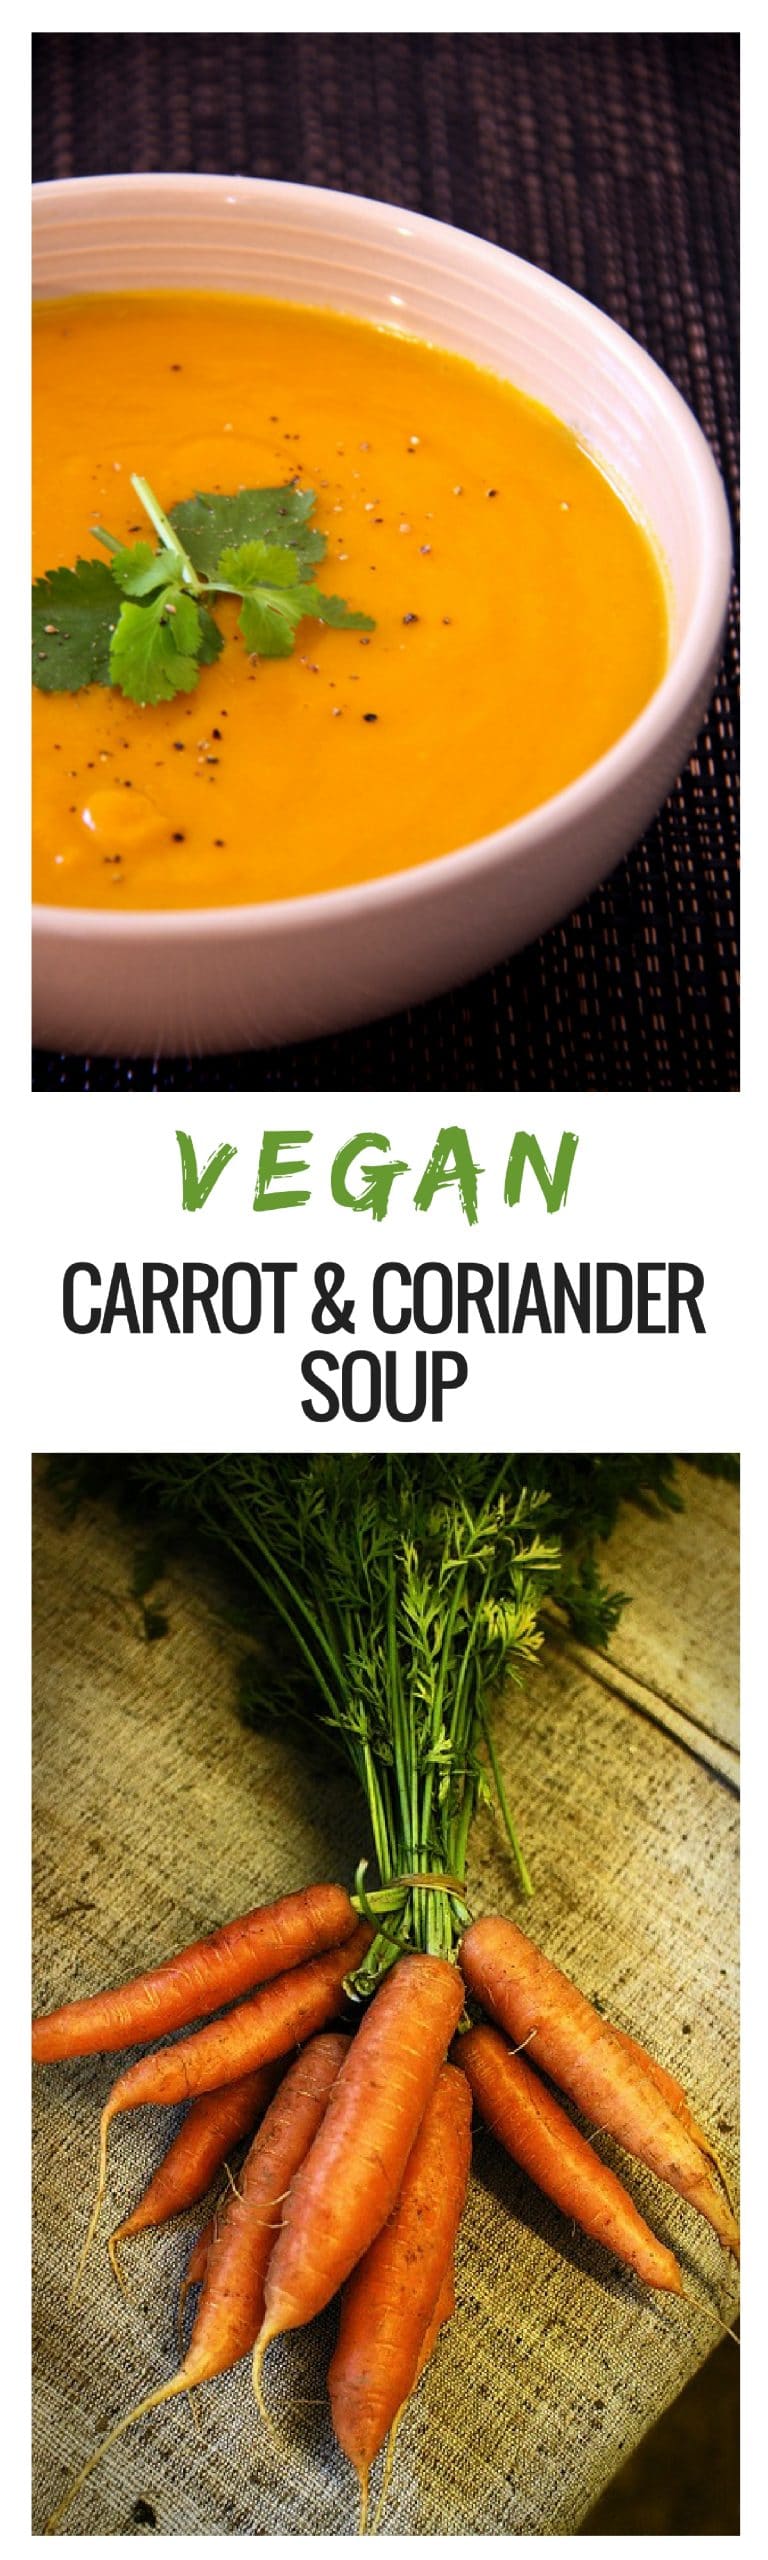 Vegan Carrot and Coriander Soup | Delicious Everyday